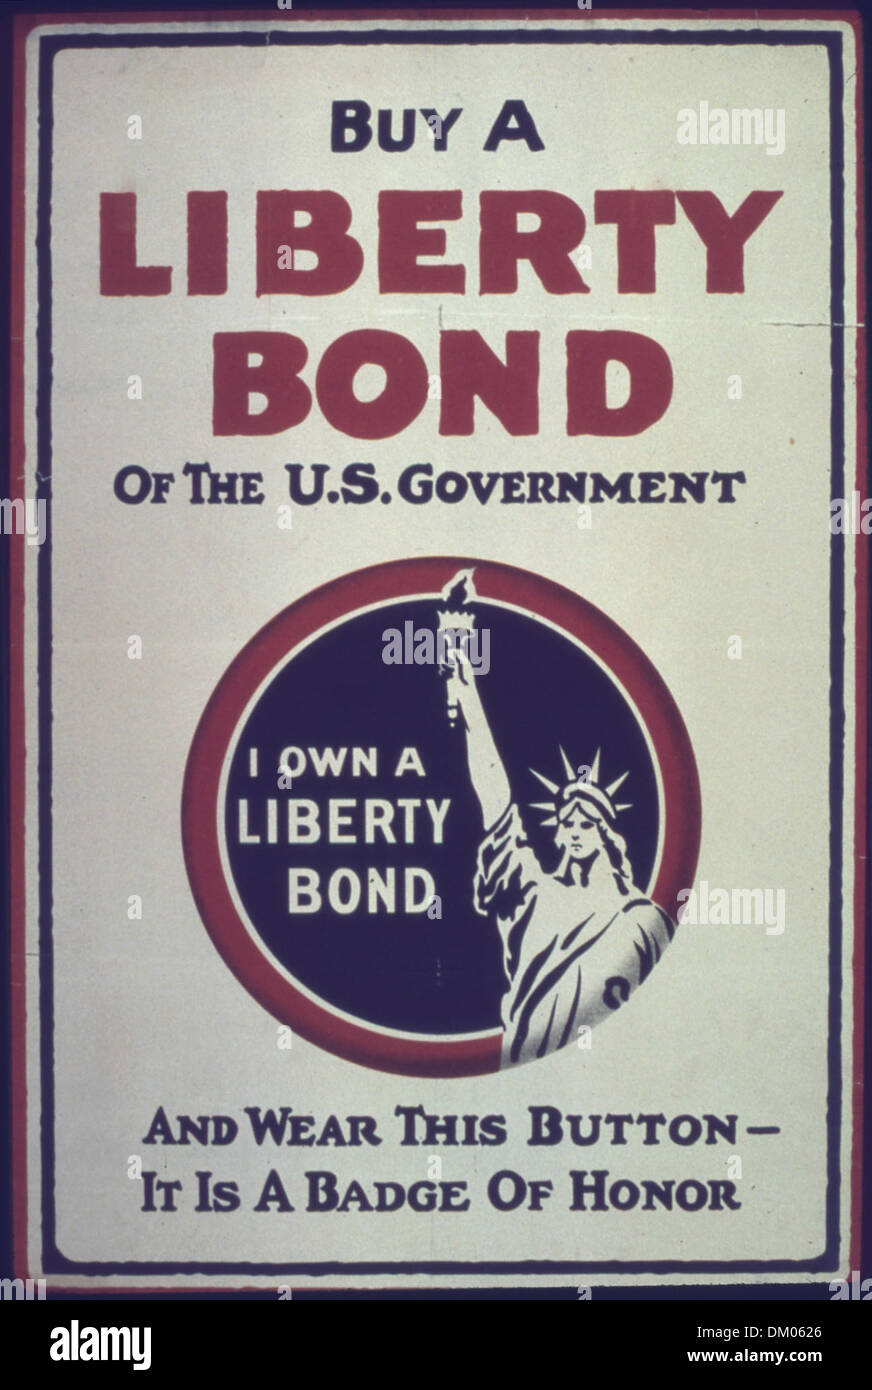 'Buy a liberty bond of the U.S. government' 513991 Stock Photo